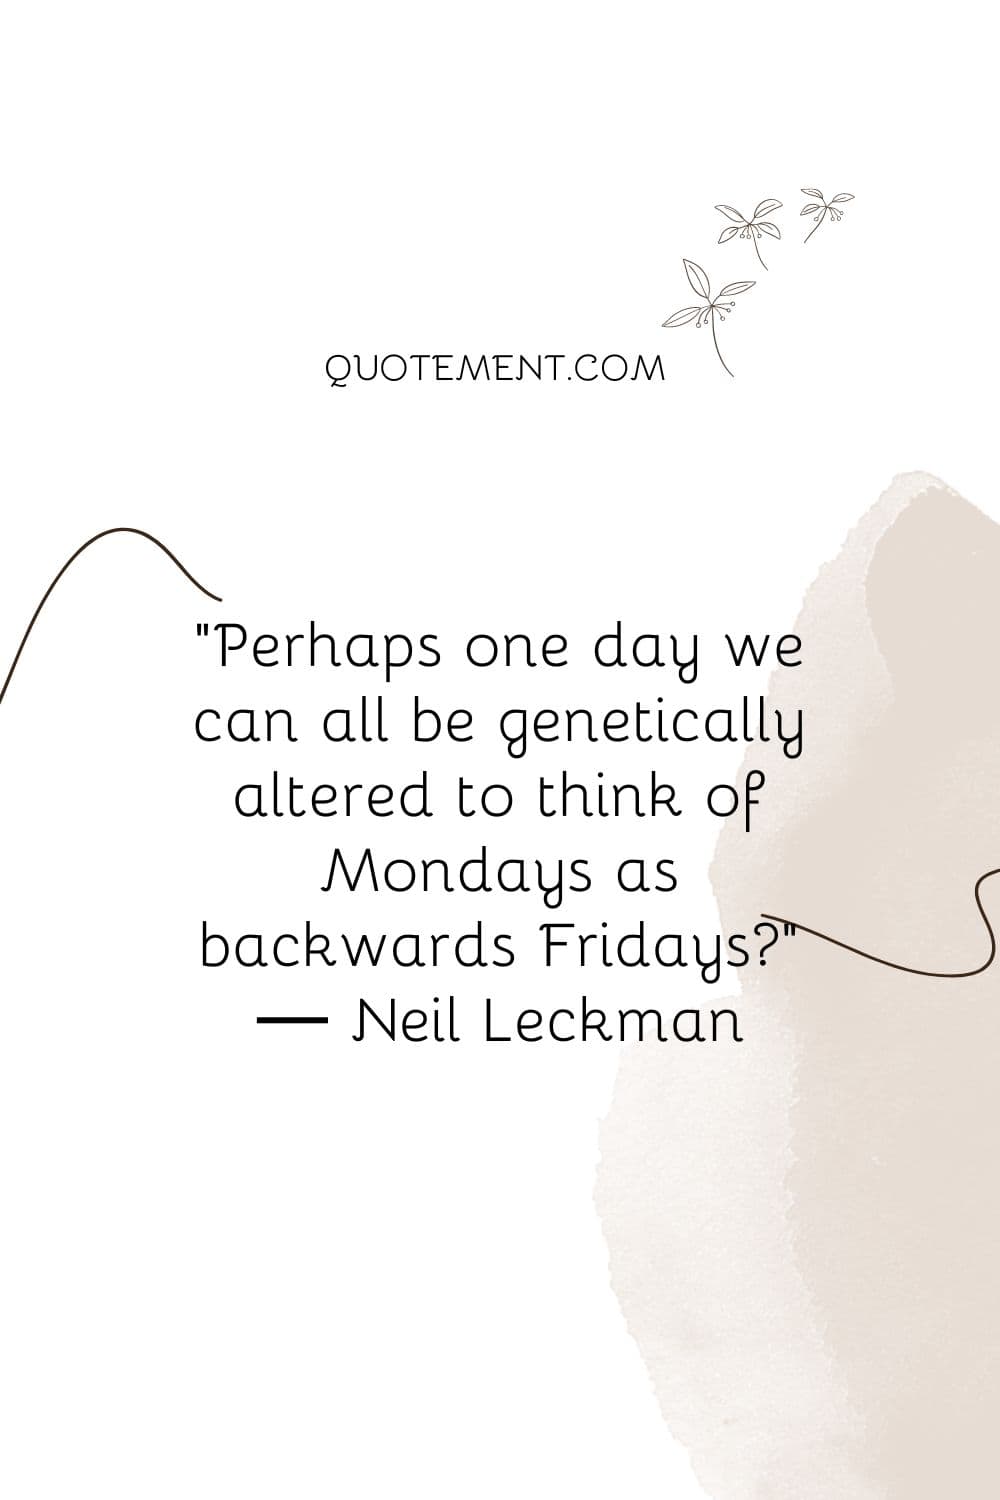 Perhaps one day we can all be genetically altered to think of Mondays as backwards Fridays?”